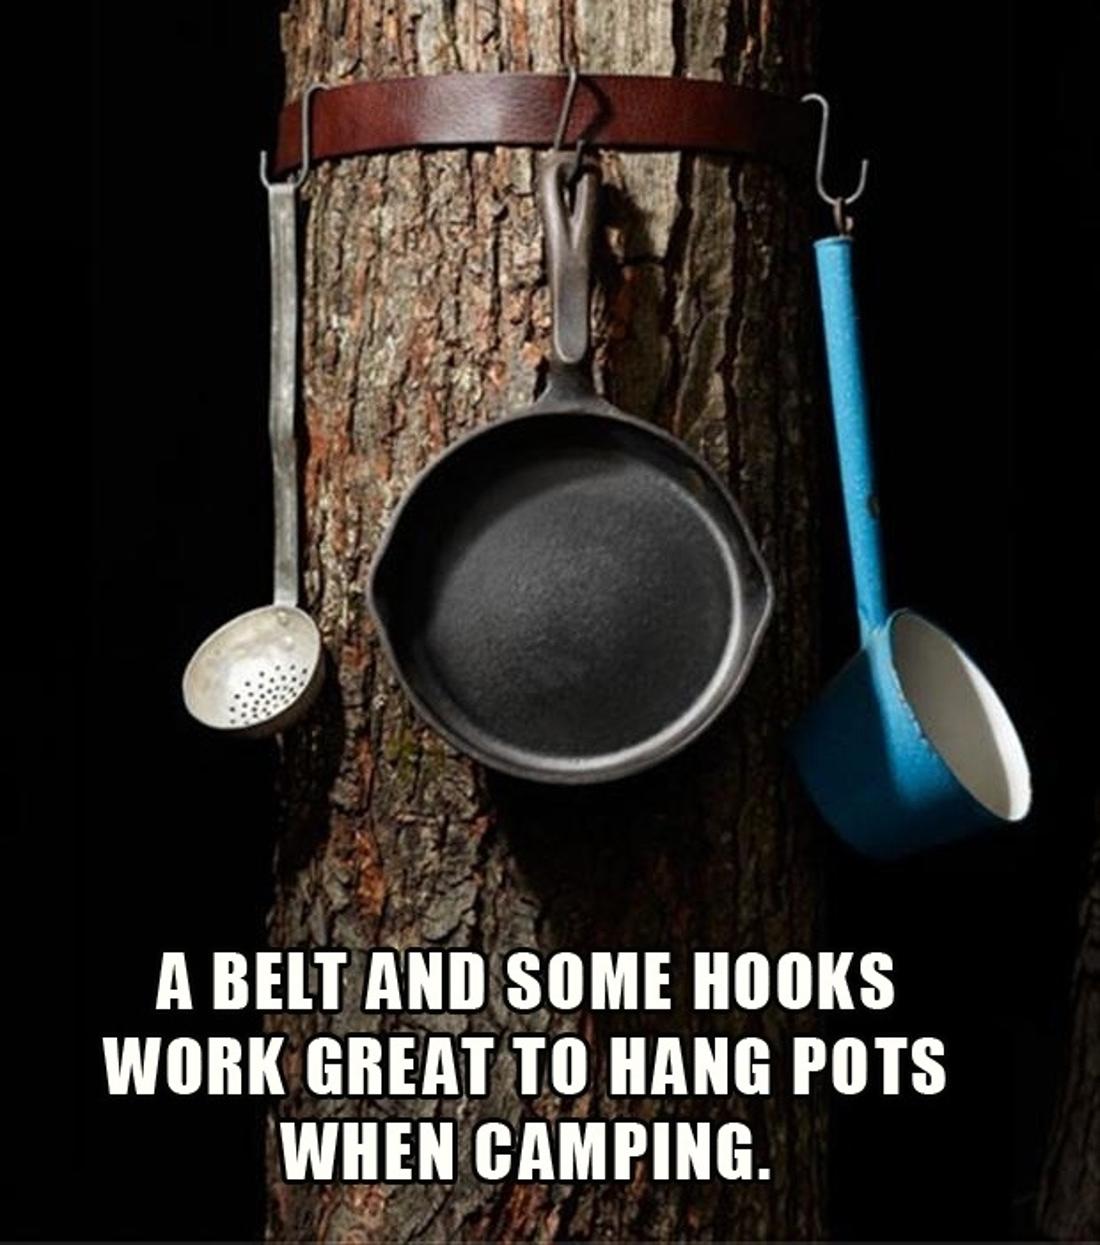 Use a belt and hooks to hang up pots and pans.